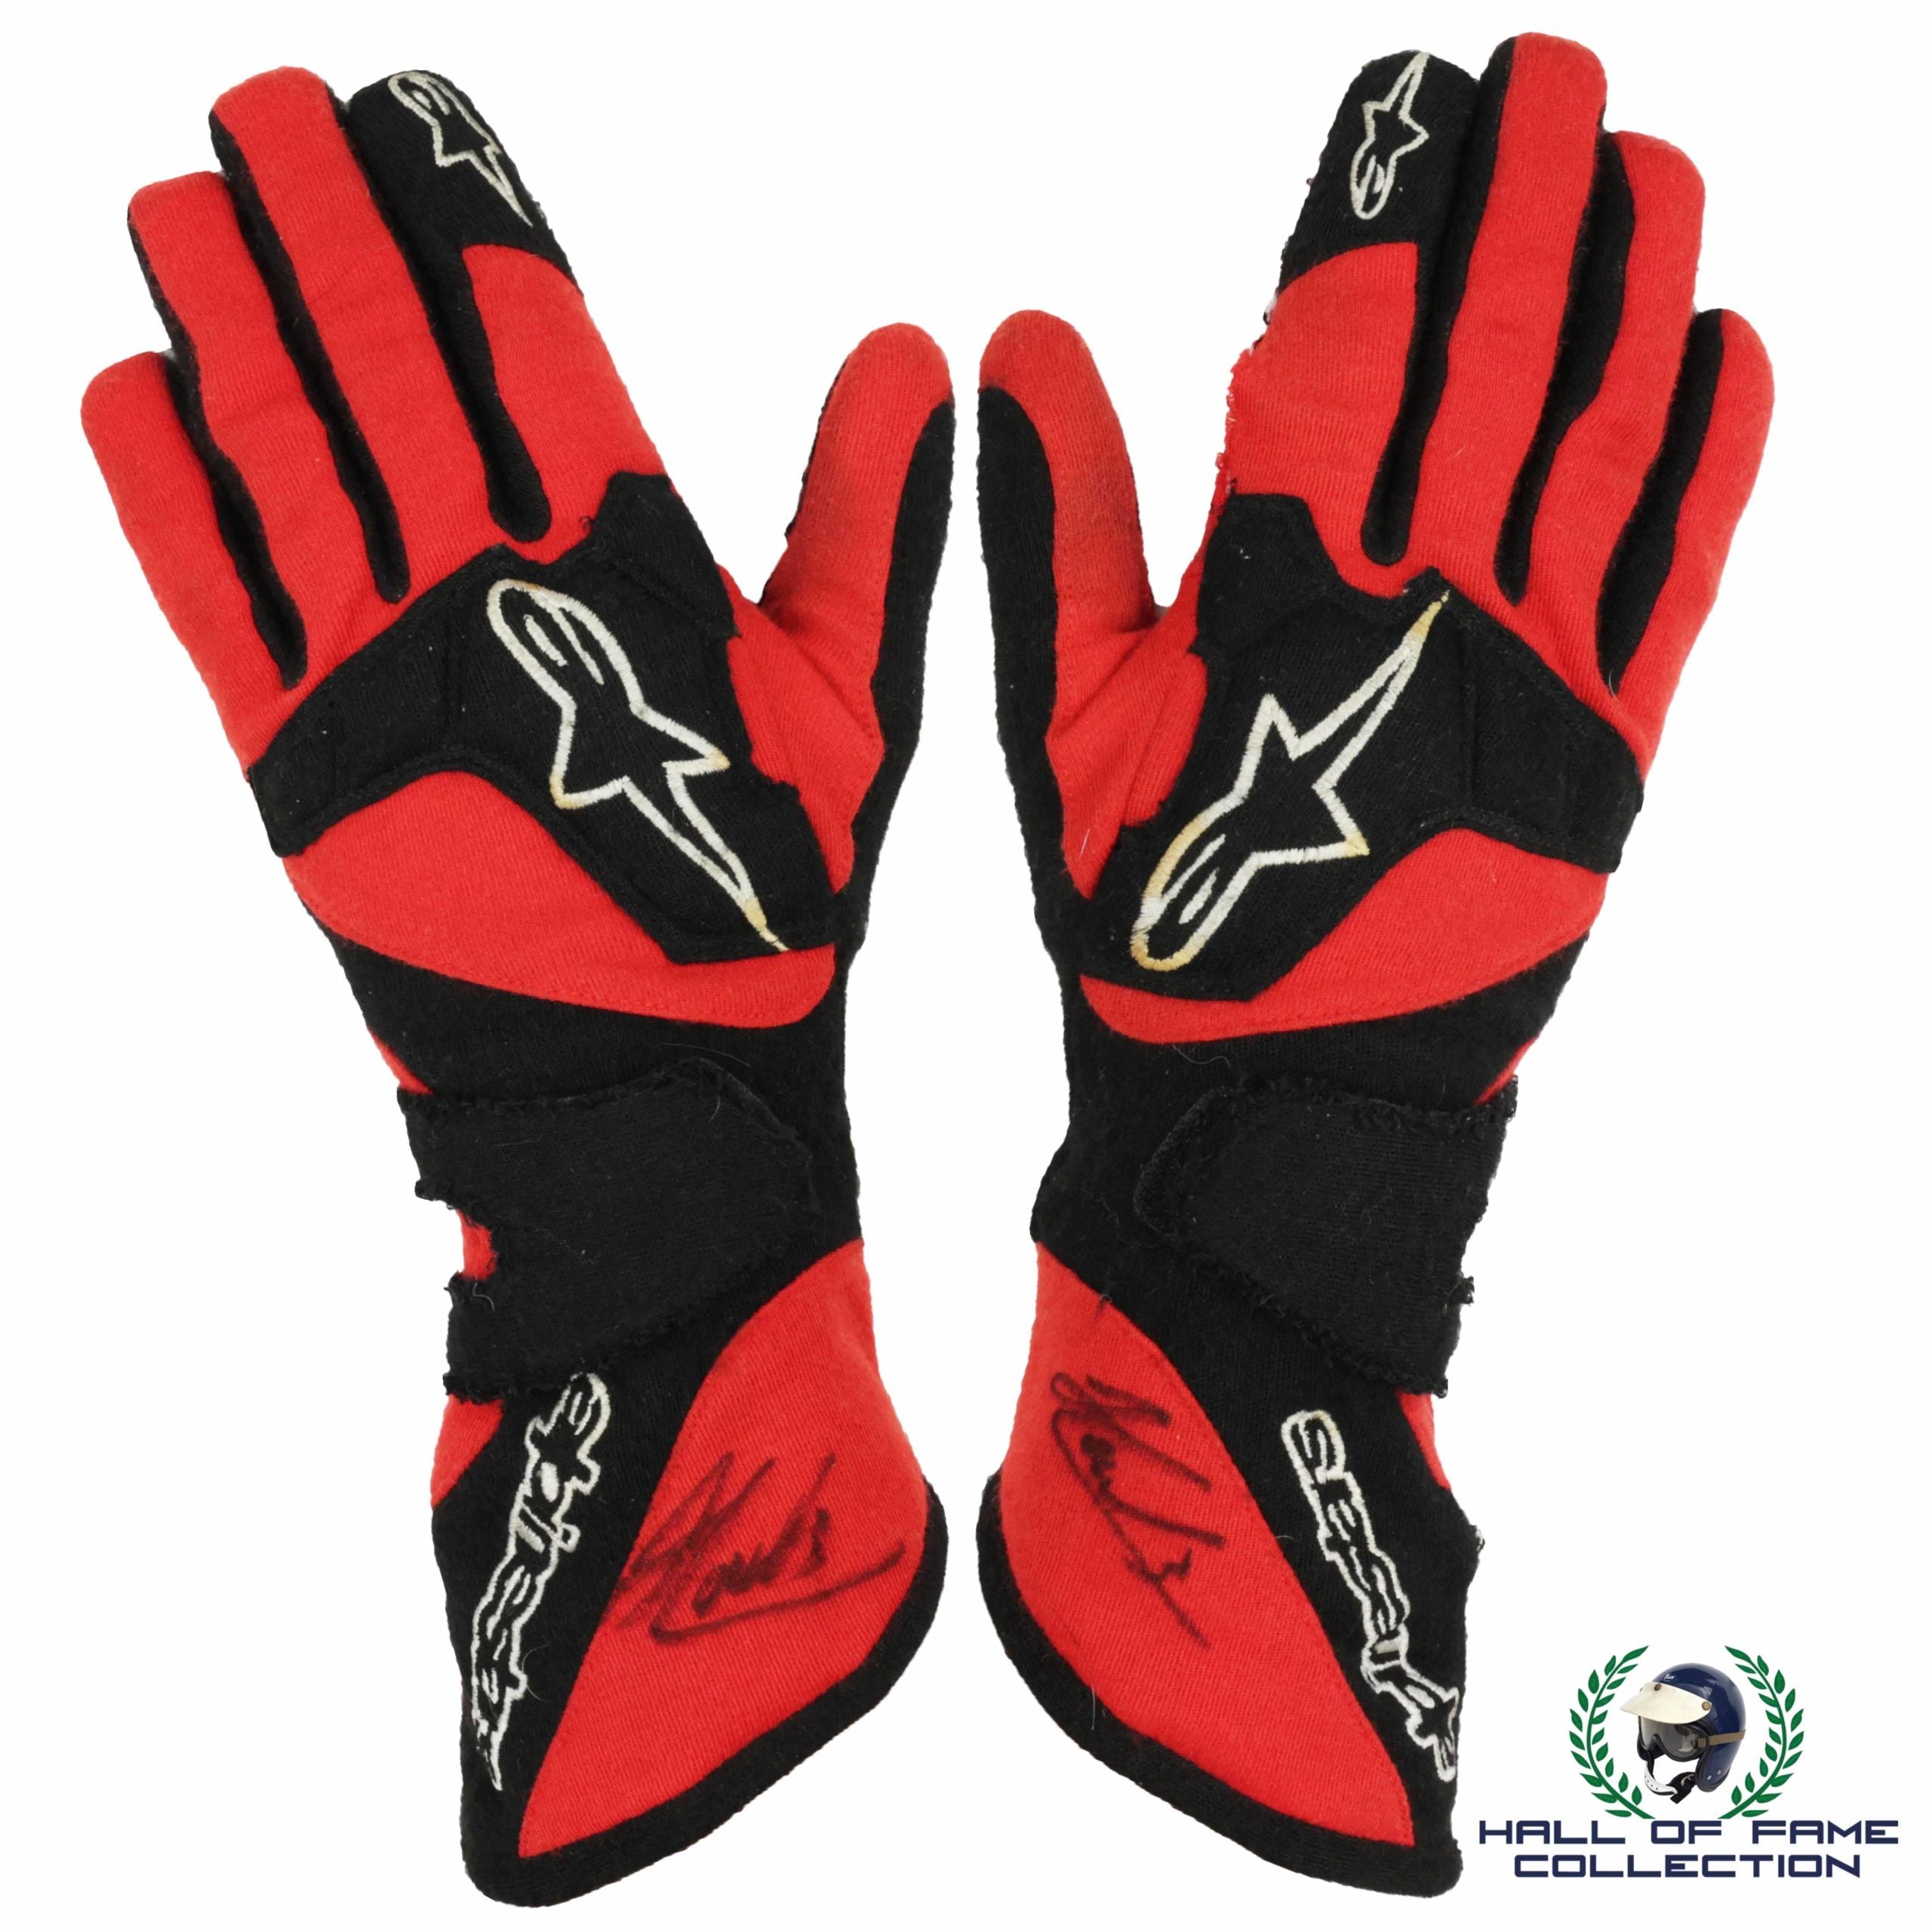 2017 Helio Castroneves Signed Race Used Team Penske IMSA and IndyCar Gloves